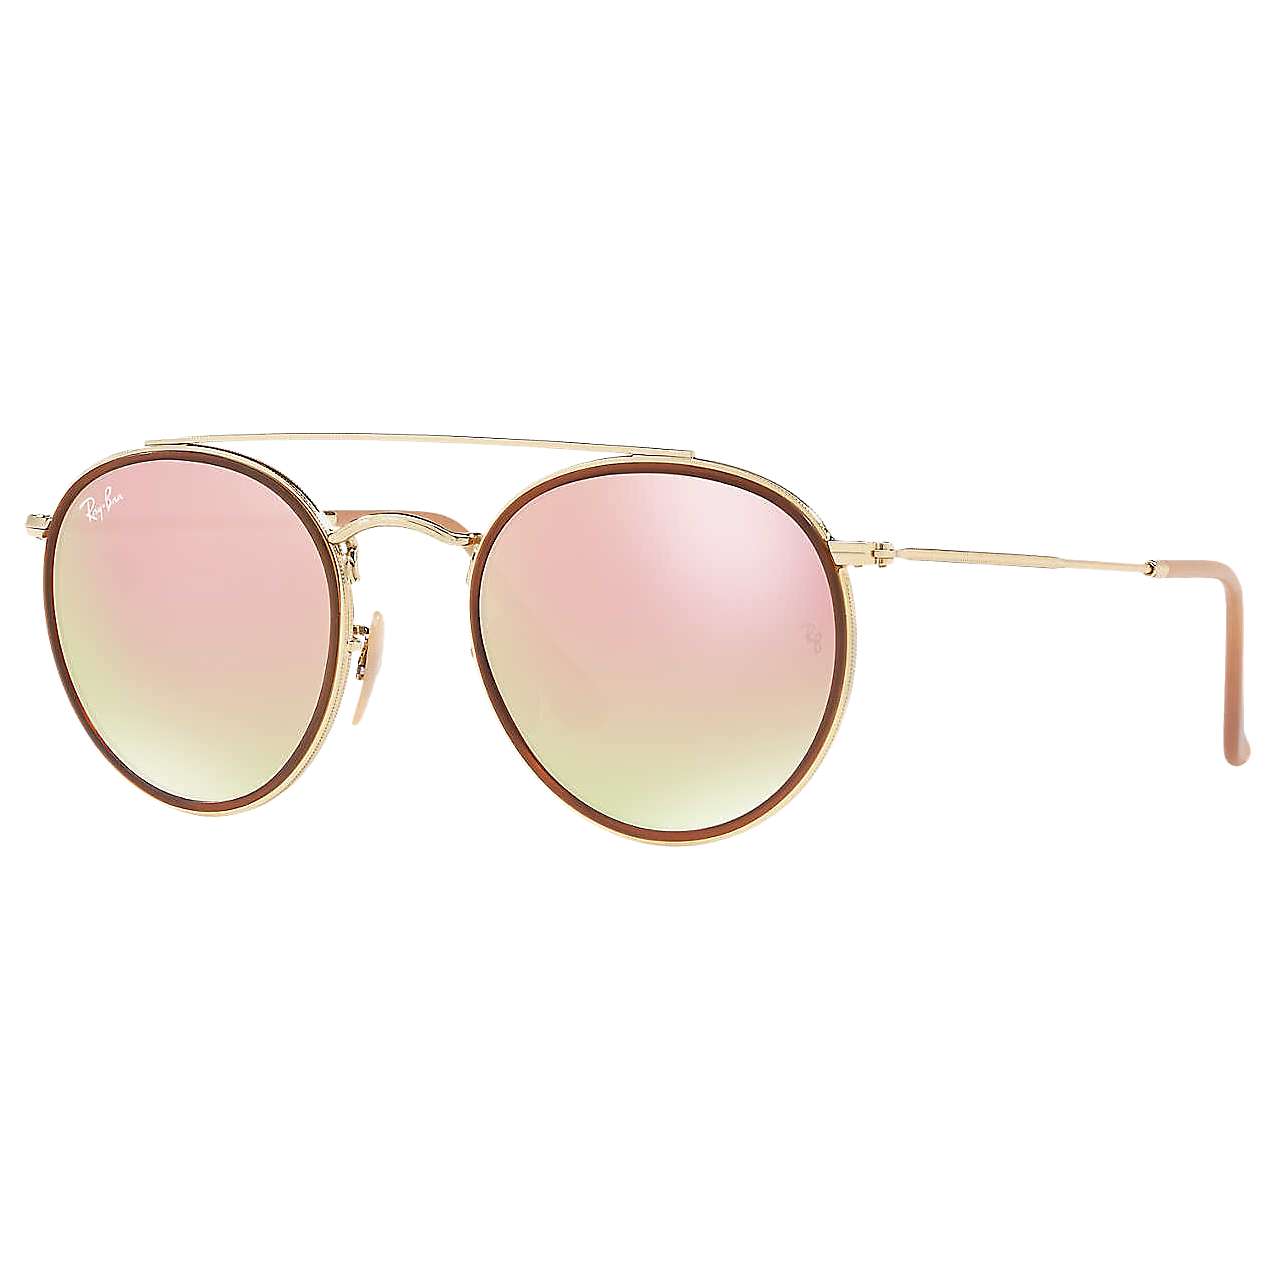 Buy Ray-Ban RB3647N Unisex Double Bridge Oval Sunglasses Online at johnlewis.com